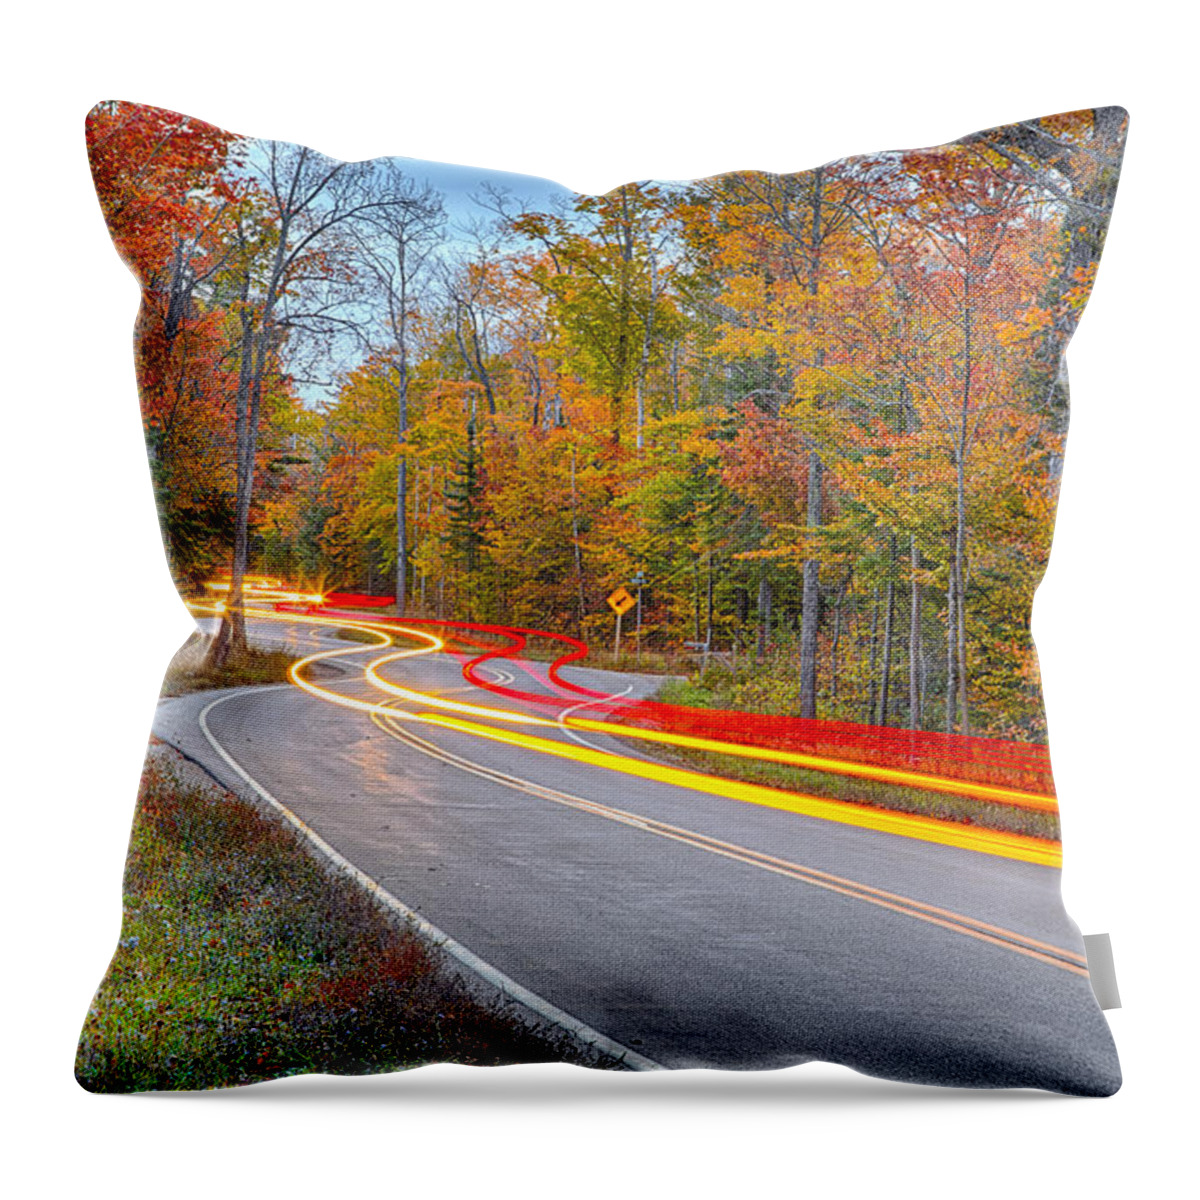 3scape Photos Throw Pillow featuring the photograph Hugging the Curves by Adam Romanowicz